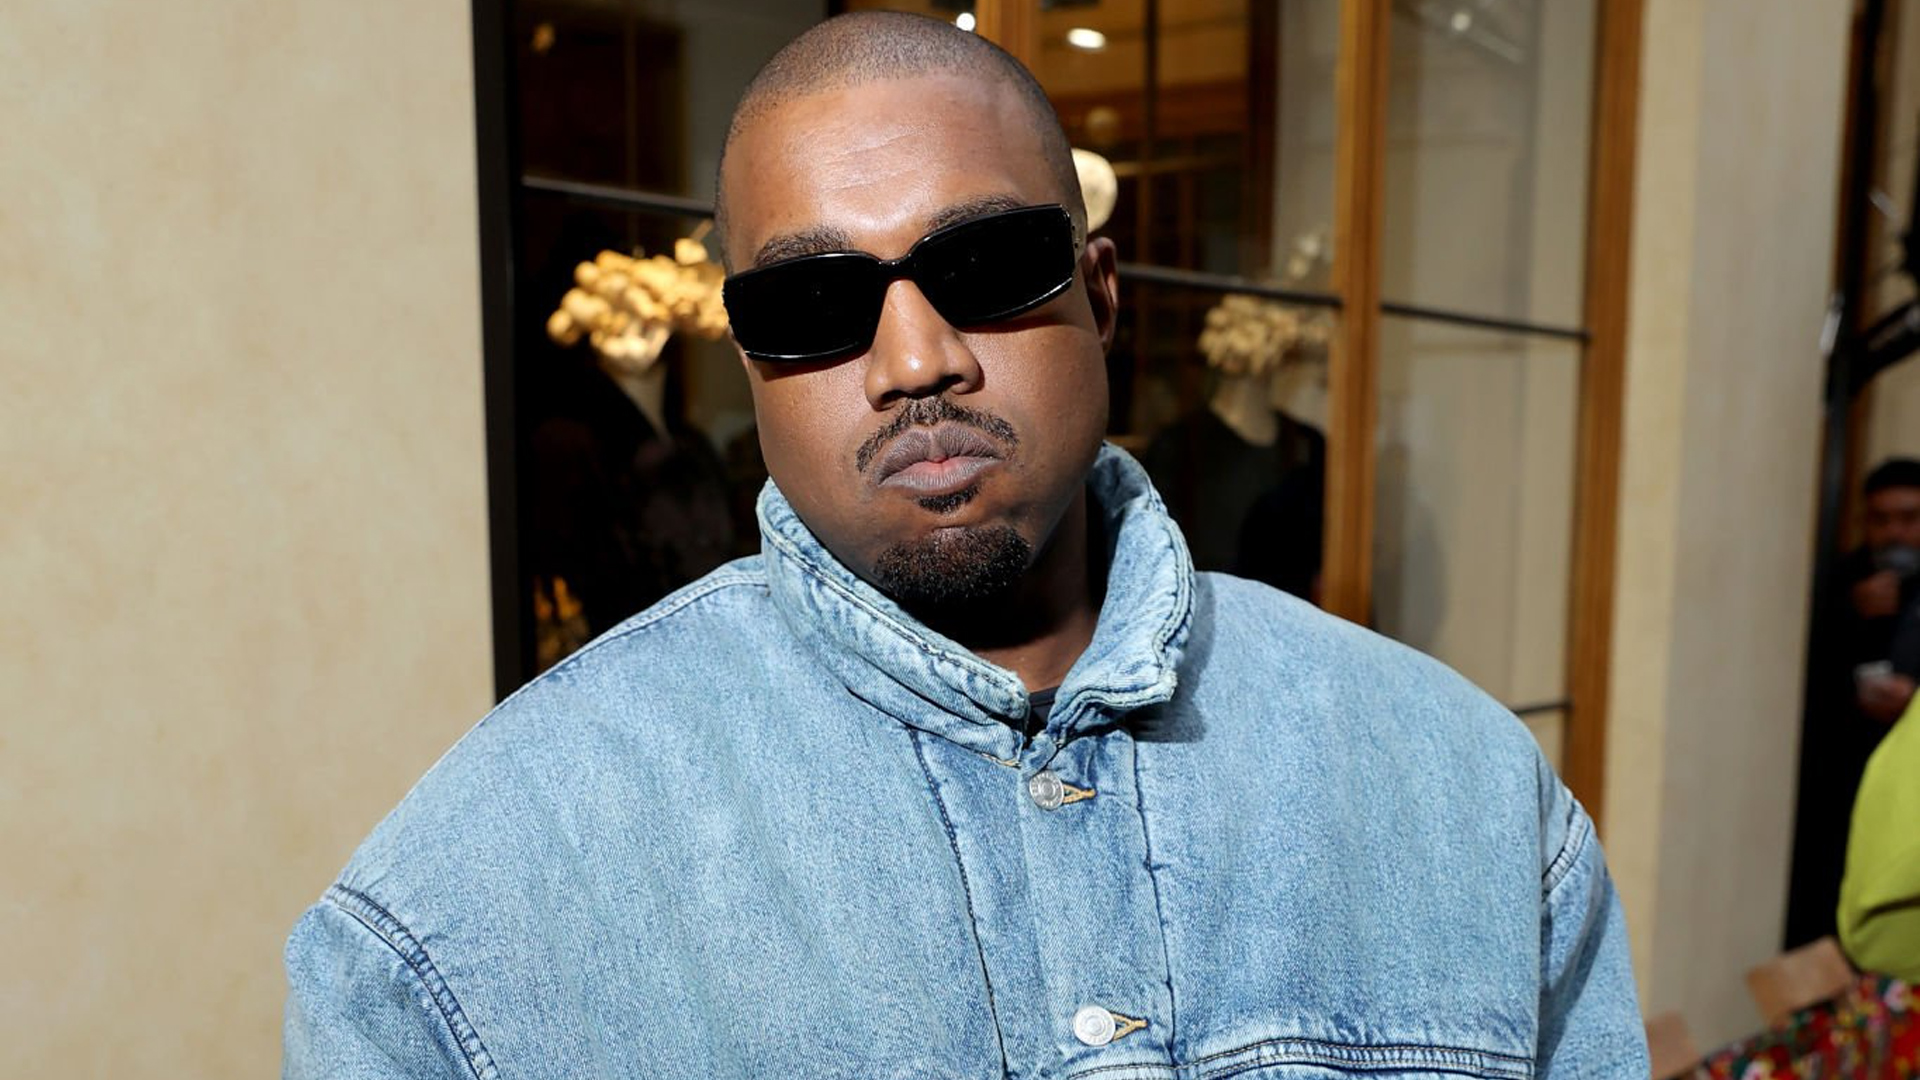 Kanye West Says His Next Album 'Donda 2' Will Only Be Available For Streaming On His Platform